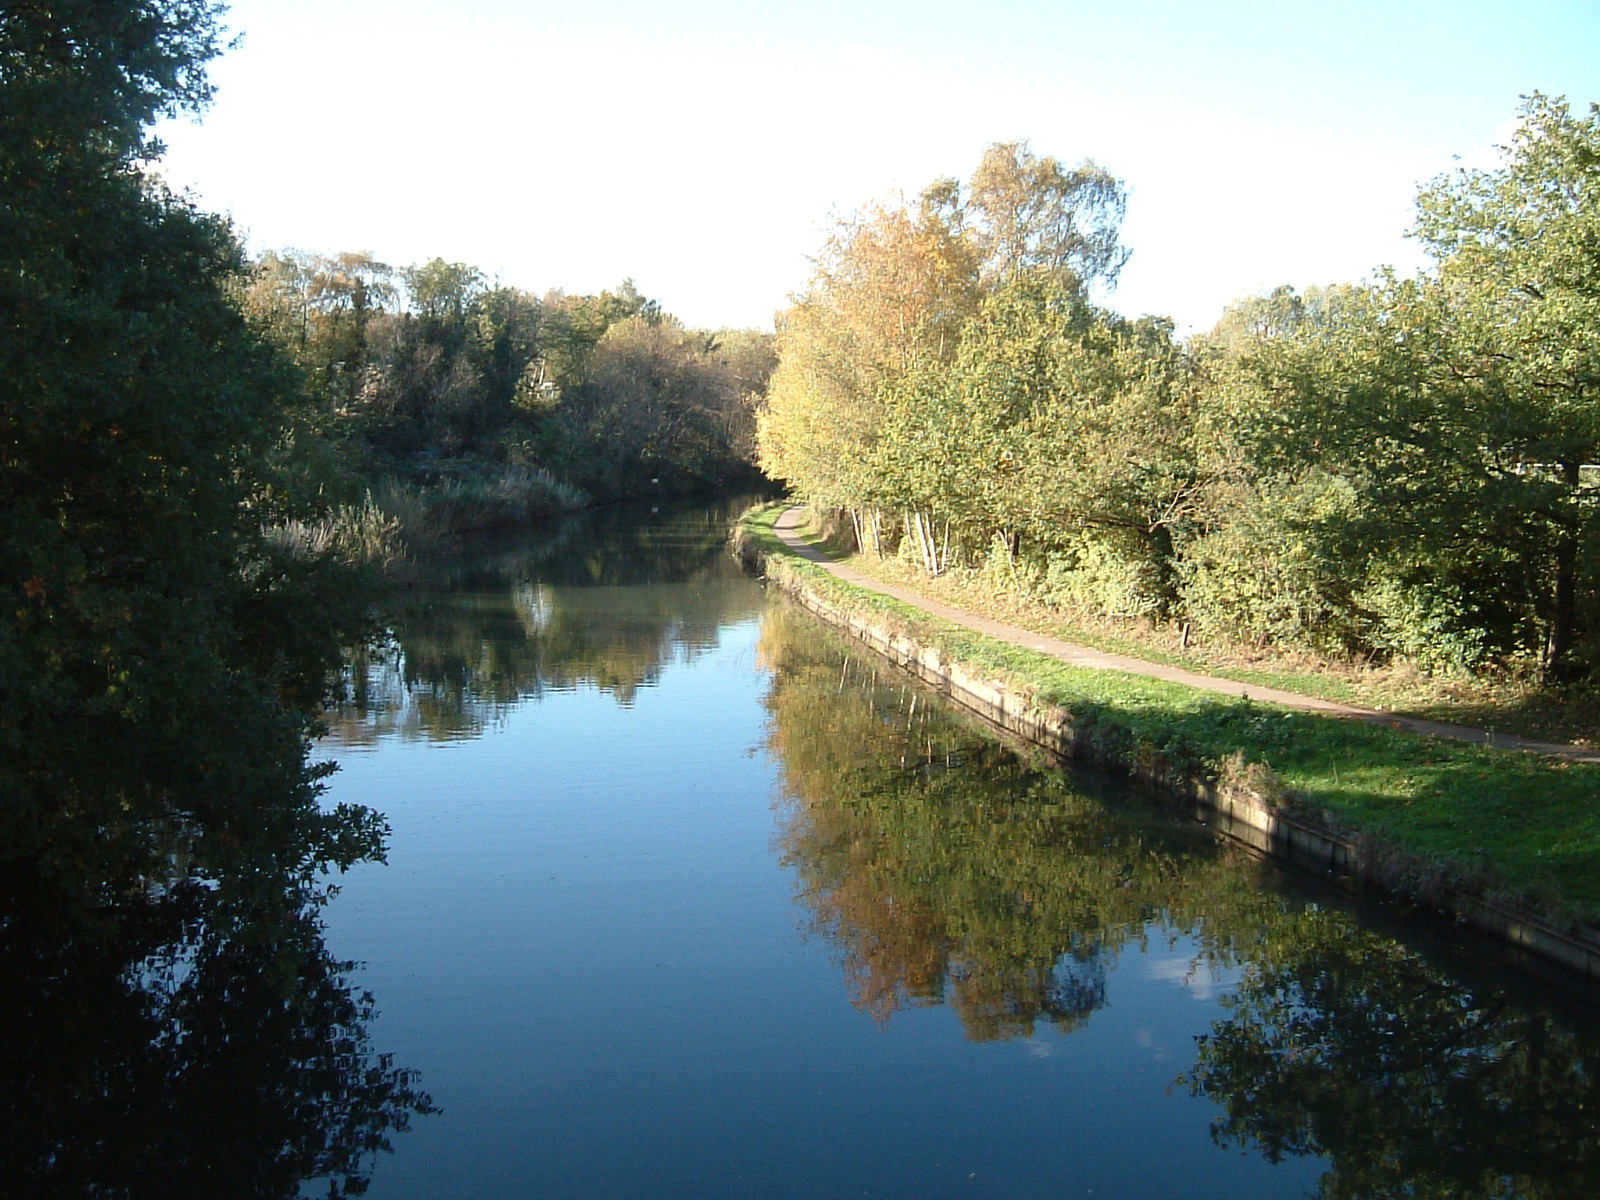 The view from Gallows Bridge